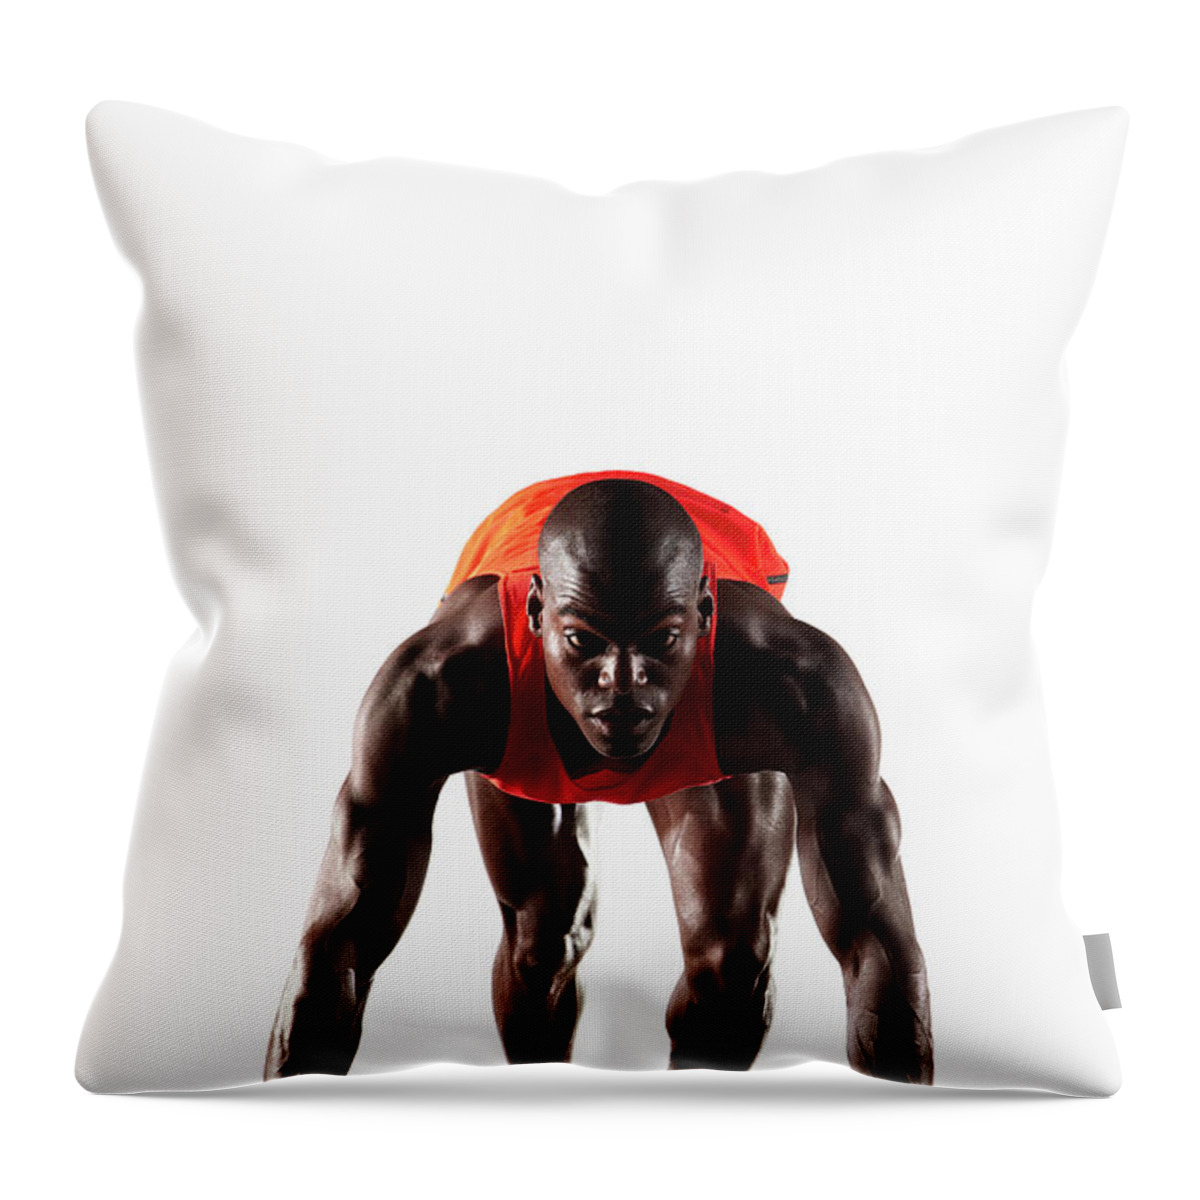 People Throw Pillow featuring the photograph Runner Crouched At Starting Line by Moof